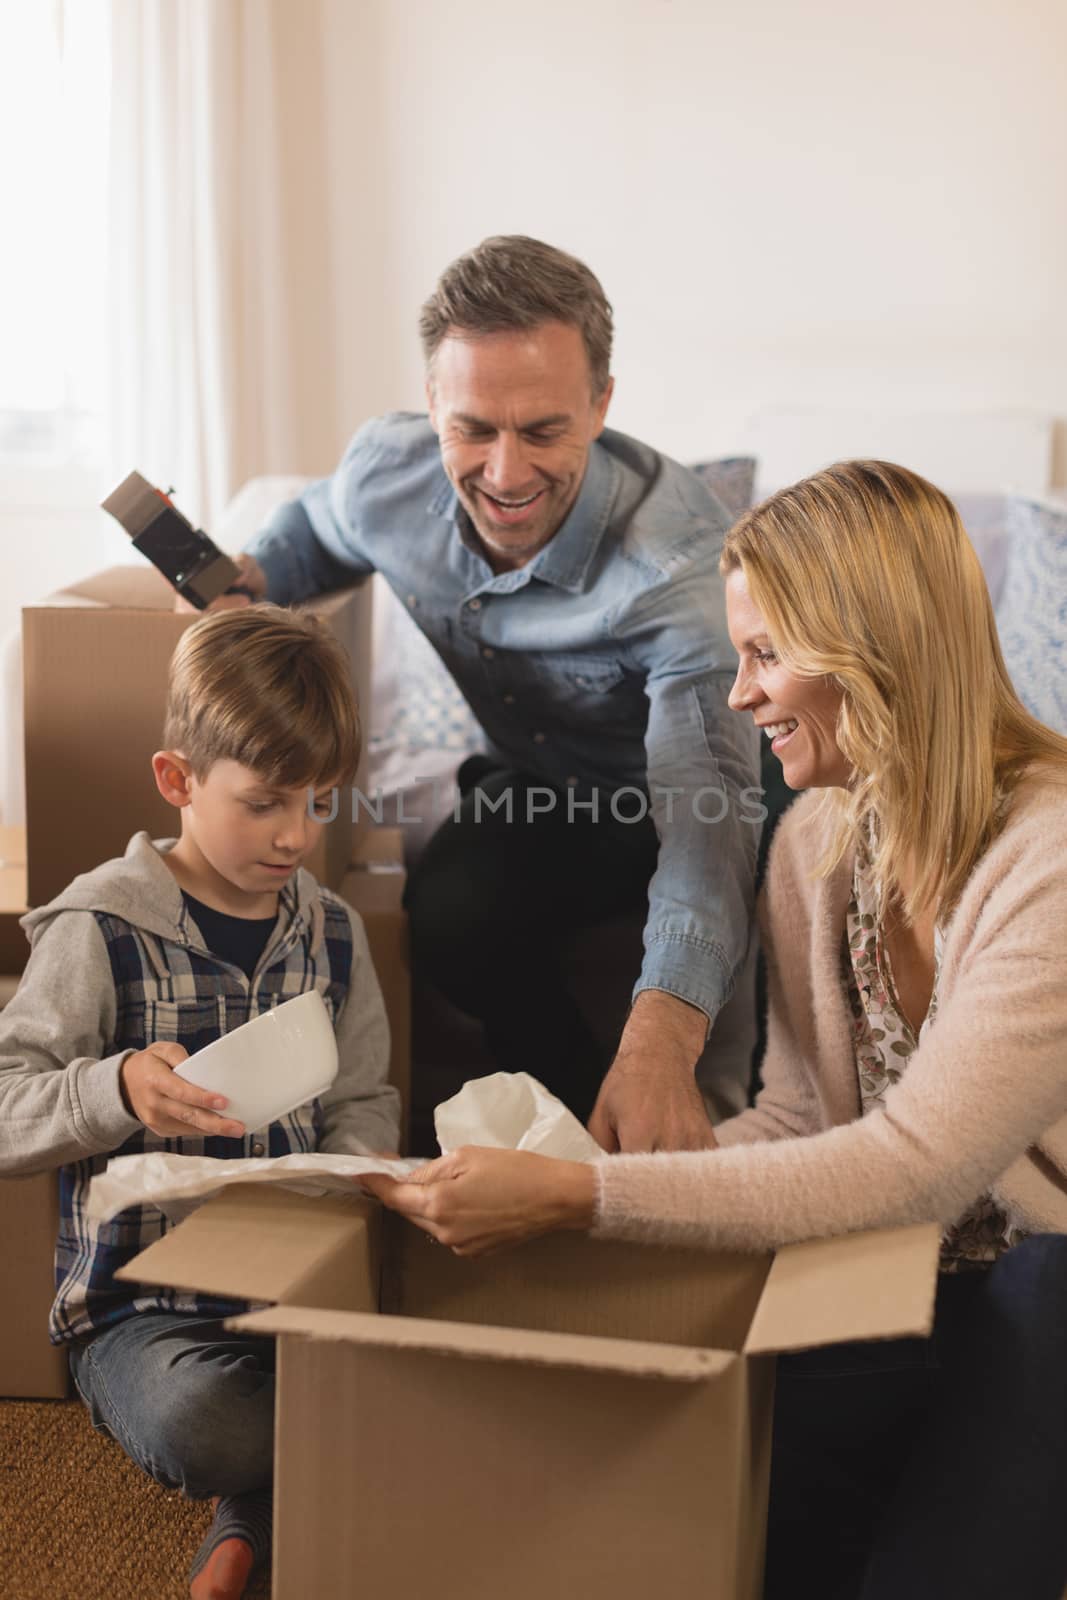 Side view of happy family spending time together while unpacking cardboard boxes in their new home